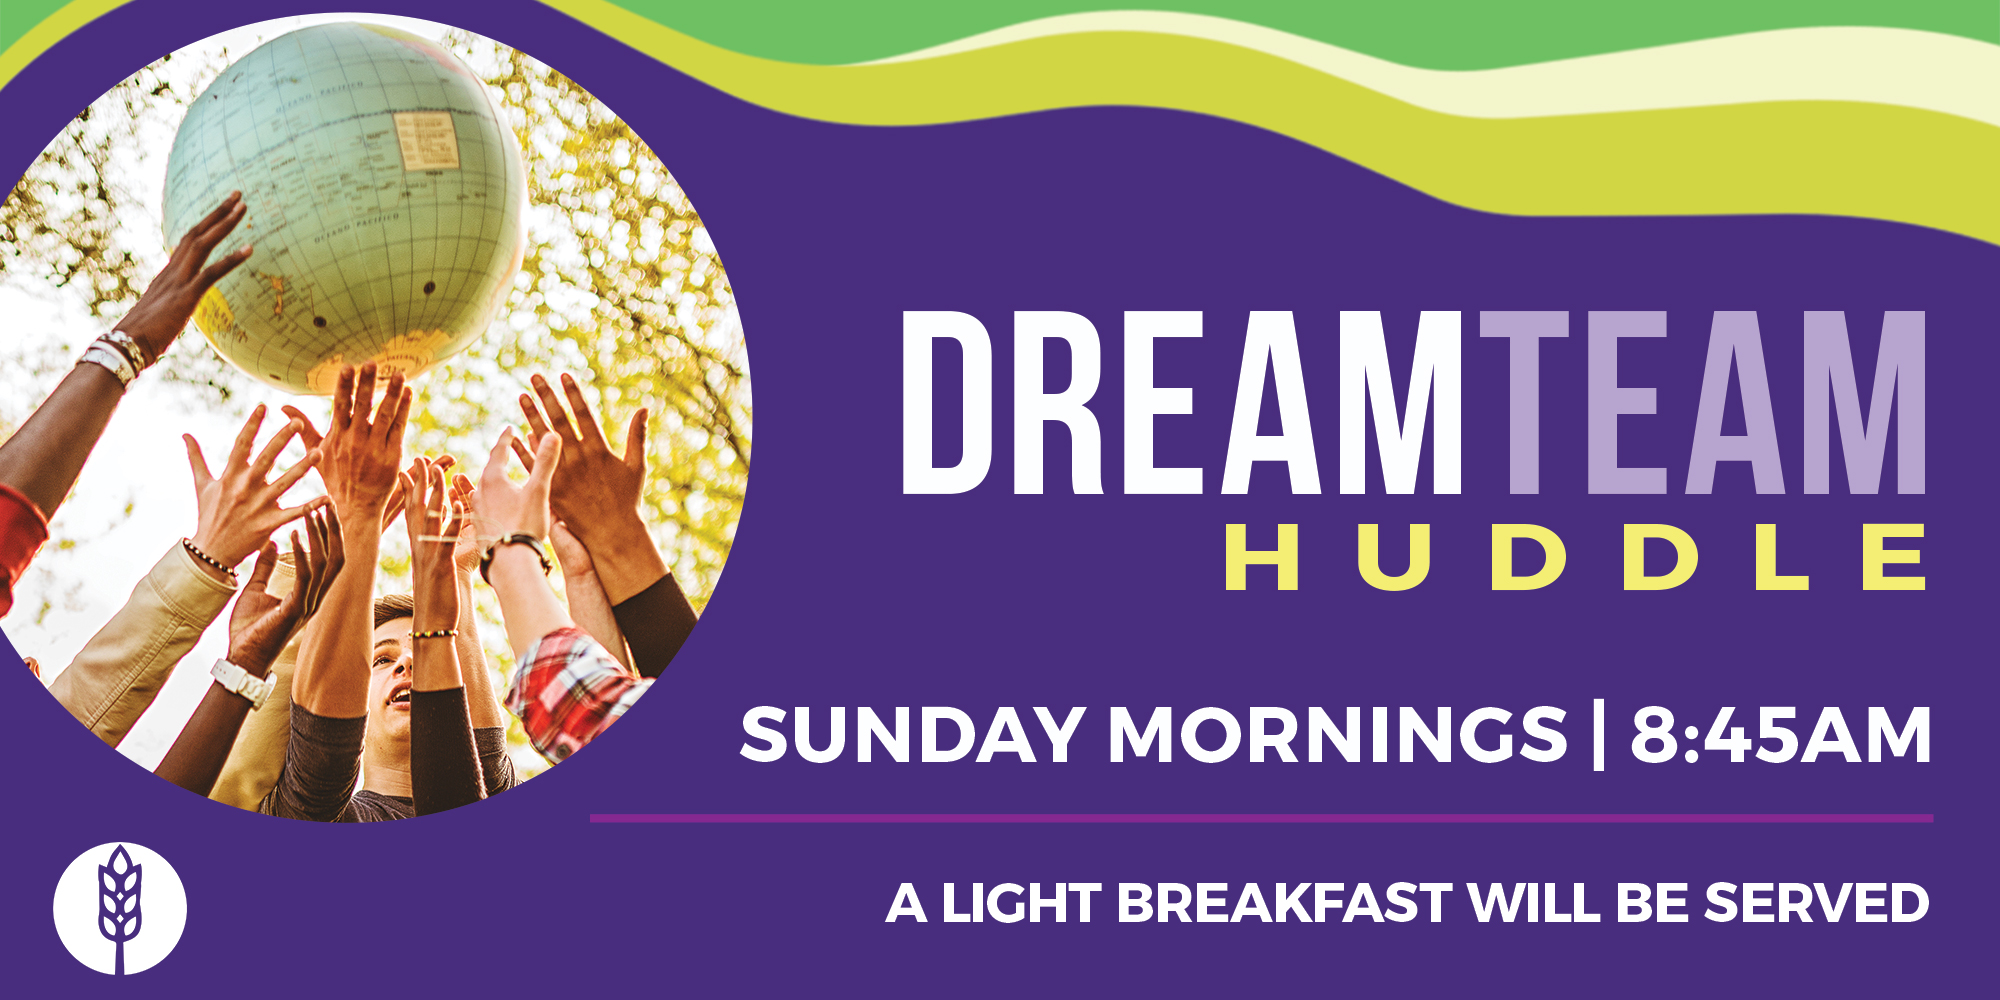 DreamTEAM Huddle Sunday Mornings 8:45AM A Light Breakfast Will be Served